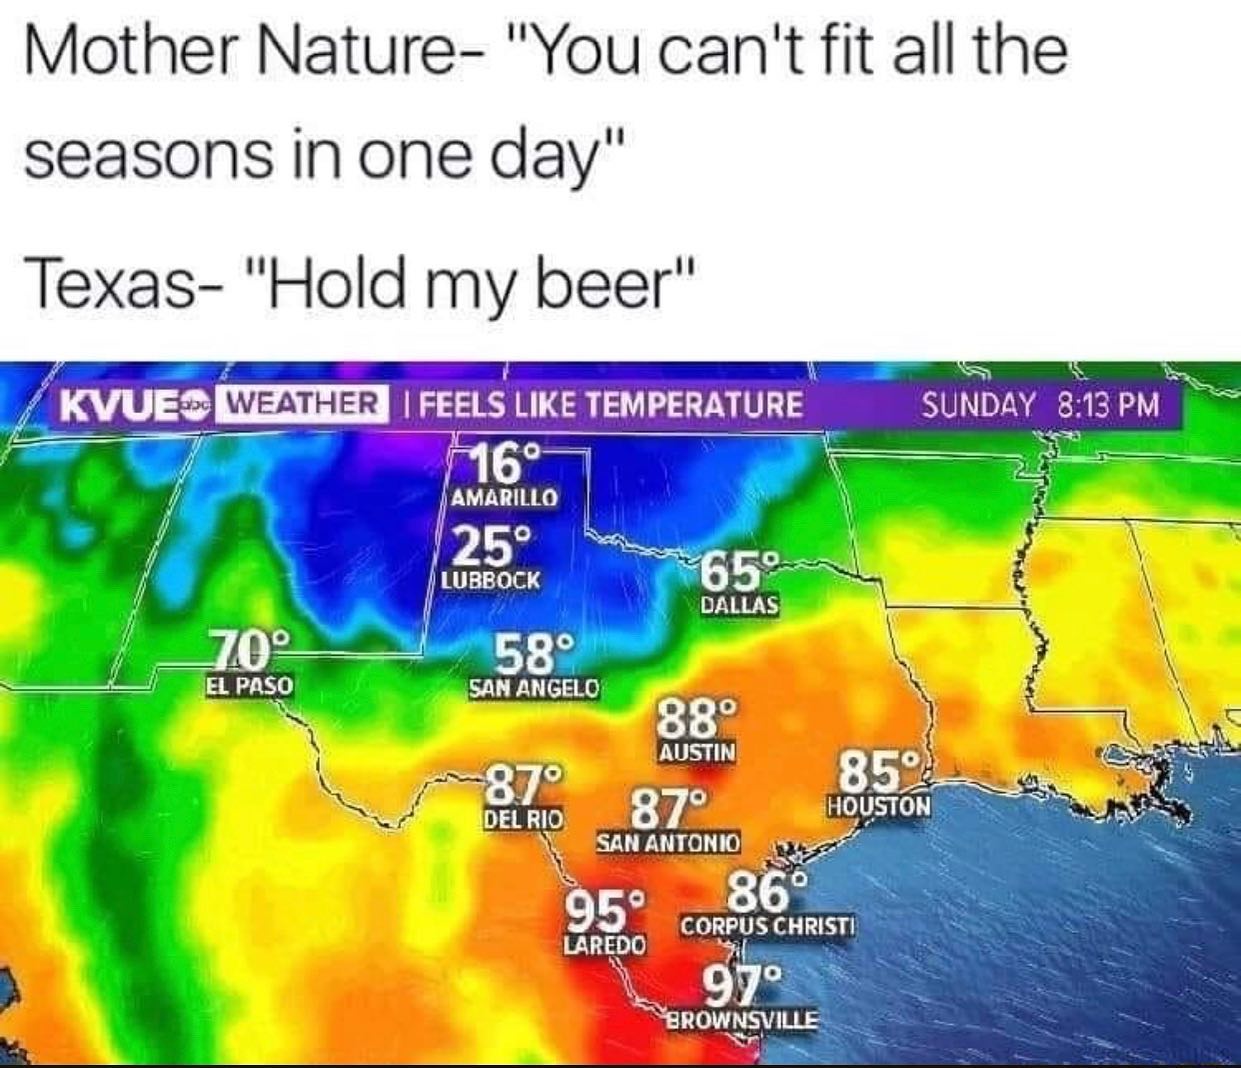 dank memes - texas weather meme - Mother Nature "You can't fit all the seasons in one day" Texas "Hold my beer" El Paso Kvue Weather Feels Temperature Sunday 16 Amarillo 25 Lubbock 65 Dallas 70 58 San Angelo 88 Austin 87 85% Del Rio 87 Houston San Antonio